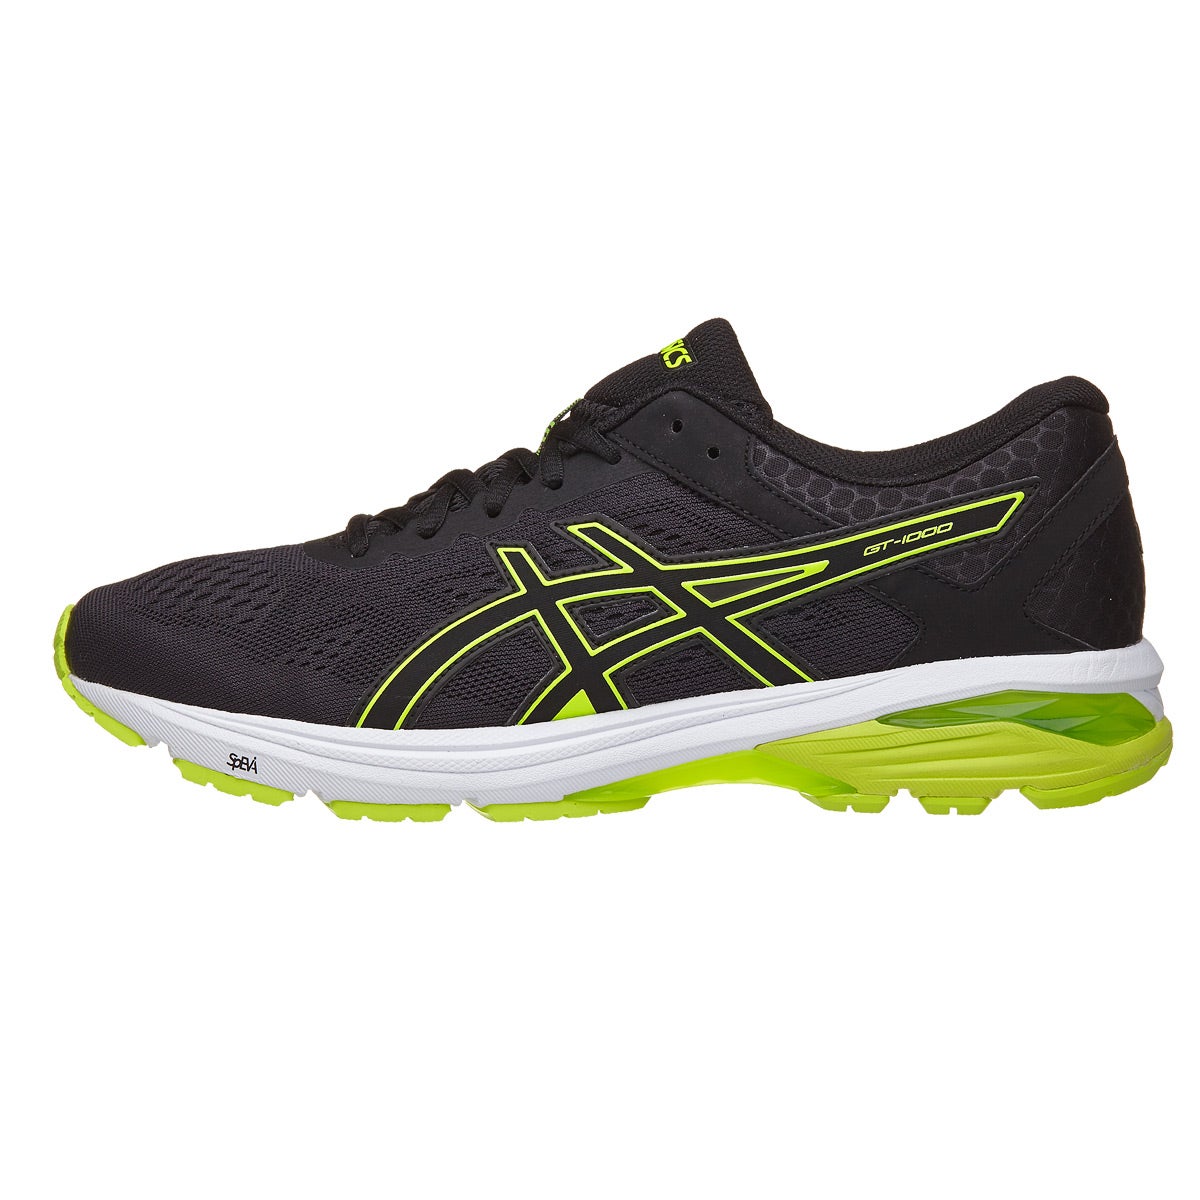 ASICS GT 1000 6 Men's Shoes Black/Safety Yellow/Blac 360° View ...